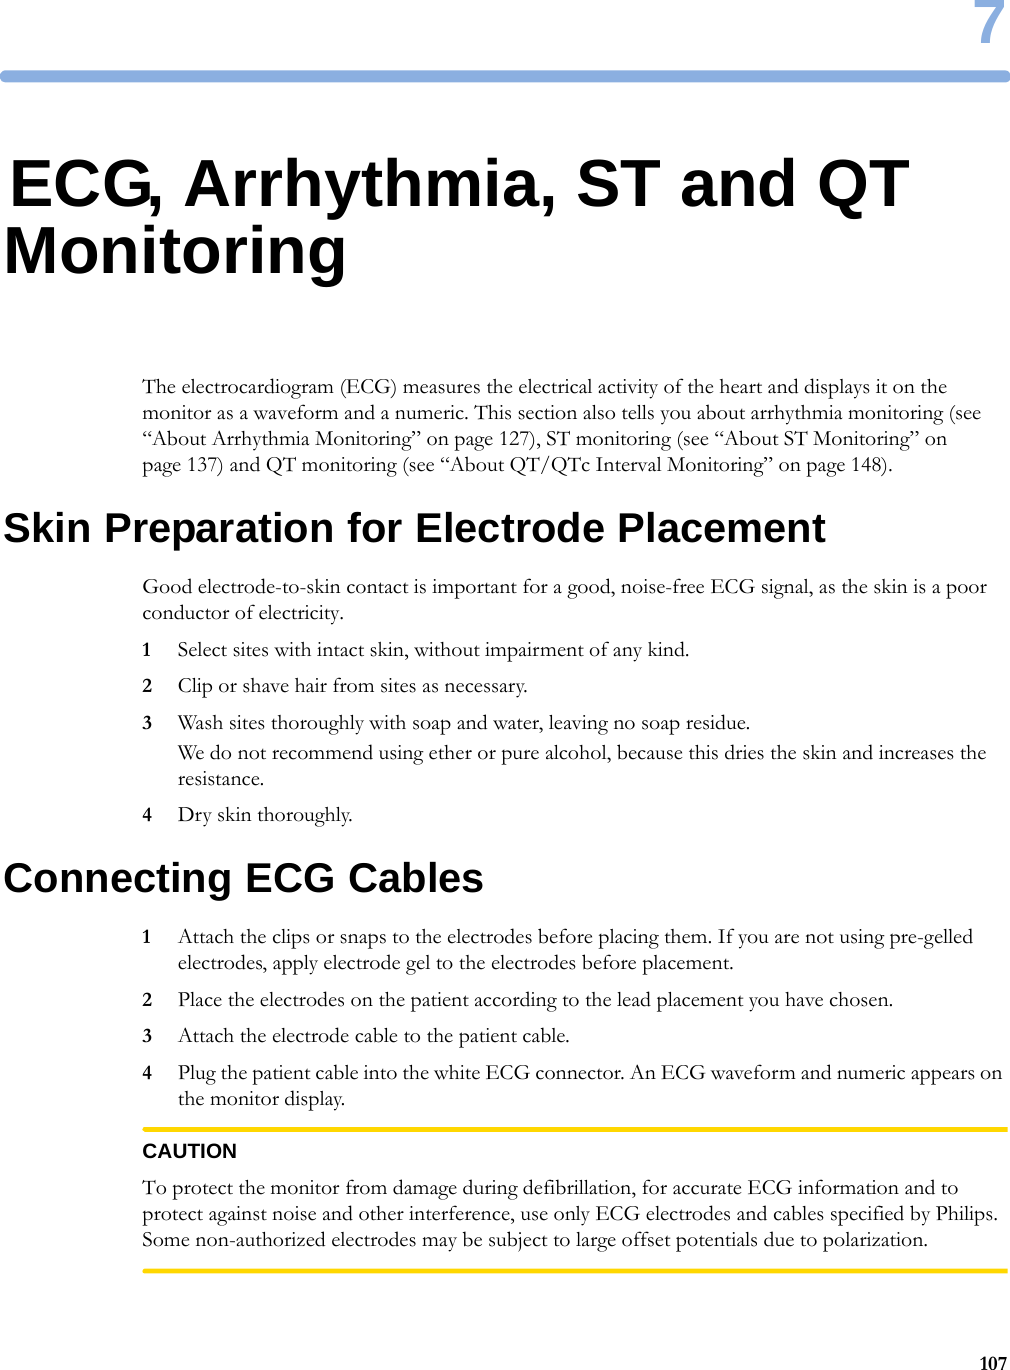 71077ECG, Arrhythmia, ST and QT MonitoringThe electrocardiogram (ECG) measures the electrical activity of the heart and displays it on the monitor as a waveform and a numeric. This section also tells you about arrhythmia monitoring (see “About Arrhythmia Monitoring” on page 127), ST monitoring (see “About ST Monitoring” on page 137) and QT monitoring (see “About QT/QTc Interval Monitoring” on page 148).Skin Preparation for Electrode PlacementGood electrode-to-skin contact is important for a good, noise-free ECG signal, as the skin is a poor conductor of electricity.1Select sites with intact skin, without impairment of any kind.2Clip or shave hair from sites as necessary.3Wash sites thoroughly with soap and water, leaving no soap residue.We do not recommend using ether or pure alcohol, because this dries the skin and increases the resistance.4Dry skin thoroughly.Connecting ECG Cables1Attach the clips or snaps to the electrodes before placing them. If you are not using pre-gelled electrodes, apply electrode gel to the electrodes before placement.2Place the electrodes on the patient according to the lead placement you have chosen.3Attach the electrode cable to the patient cable.4Plug the patient cable into the white ECG connector. An ECG waveform and numeric appears on the monitor display.CAUTIONTo protect the monitor from damage during defibrillation, for accurate ECG information and to protect against noise and other interference, use only ECG electrodes and cables specified by Philips. Some non-authorized electrodes may be subject to large offset potentials due to polarization.